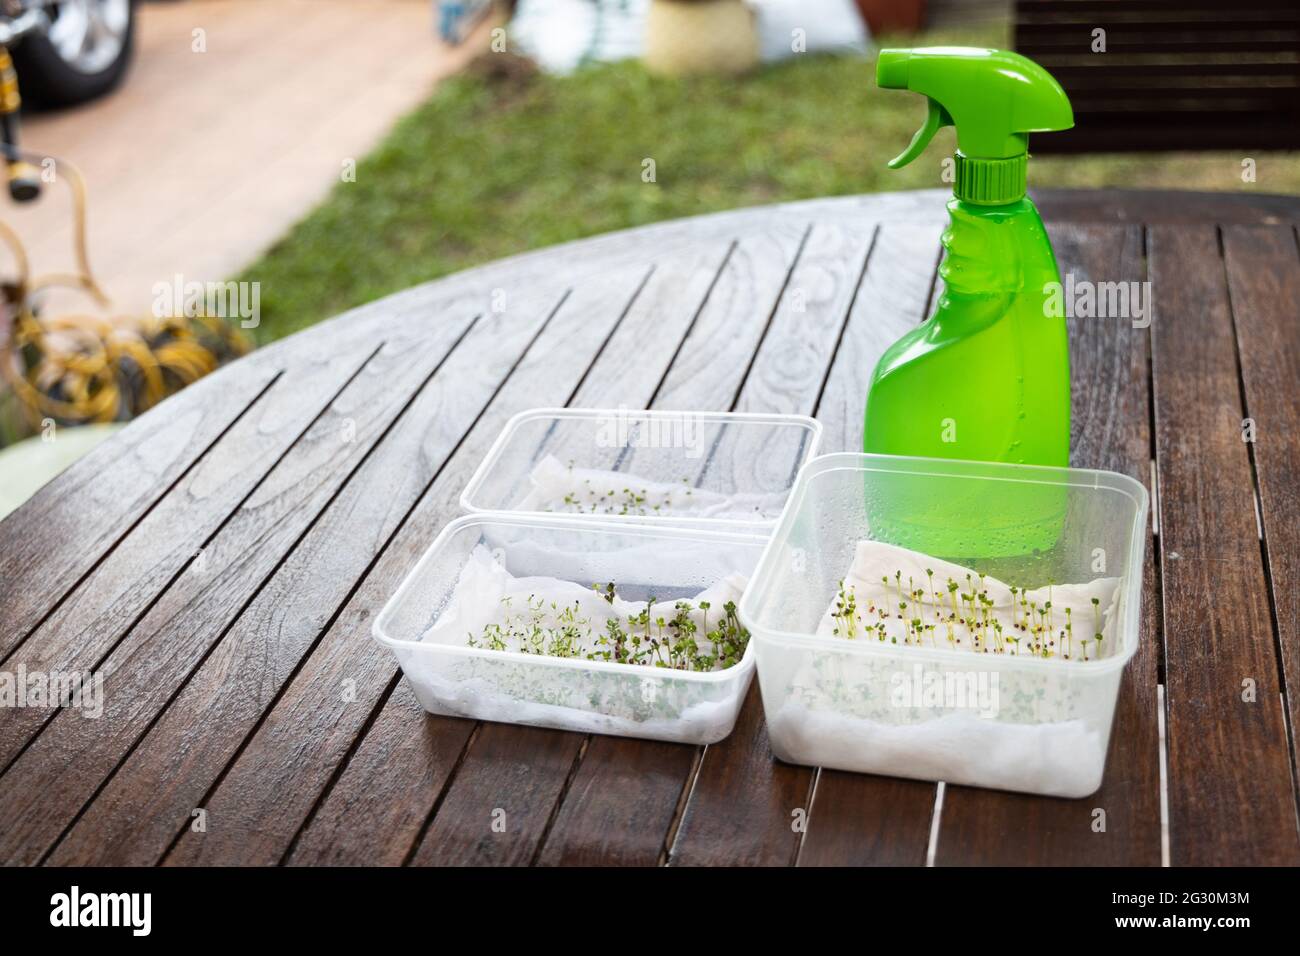 Seeds placed in container with water soaked kitchen towel to germinate. Stock Photo